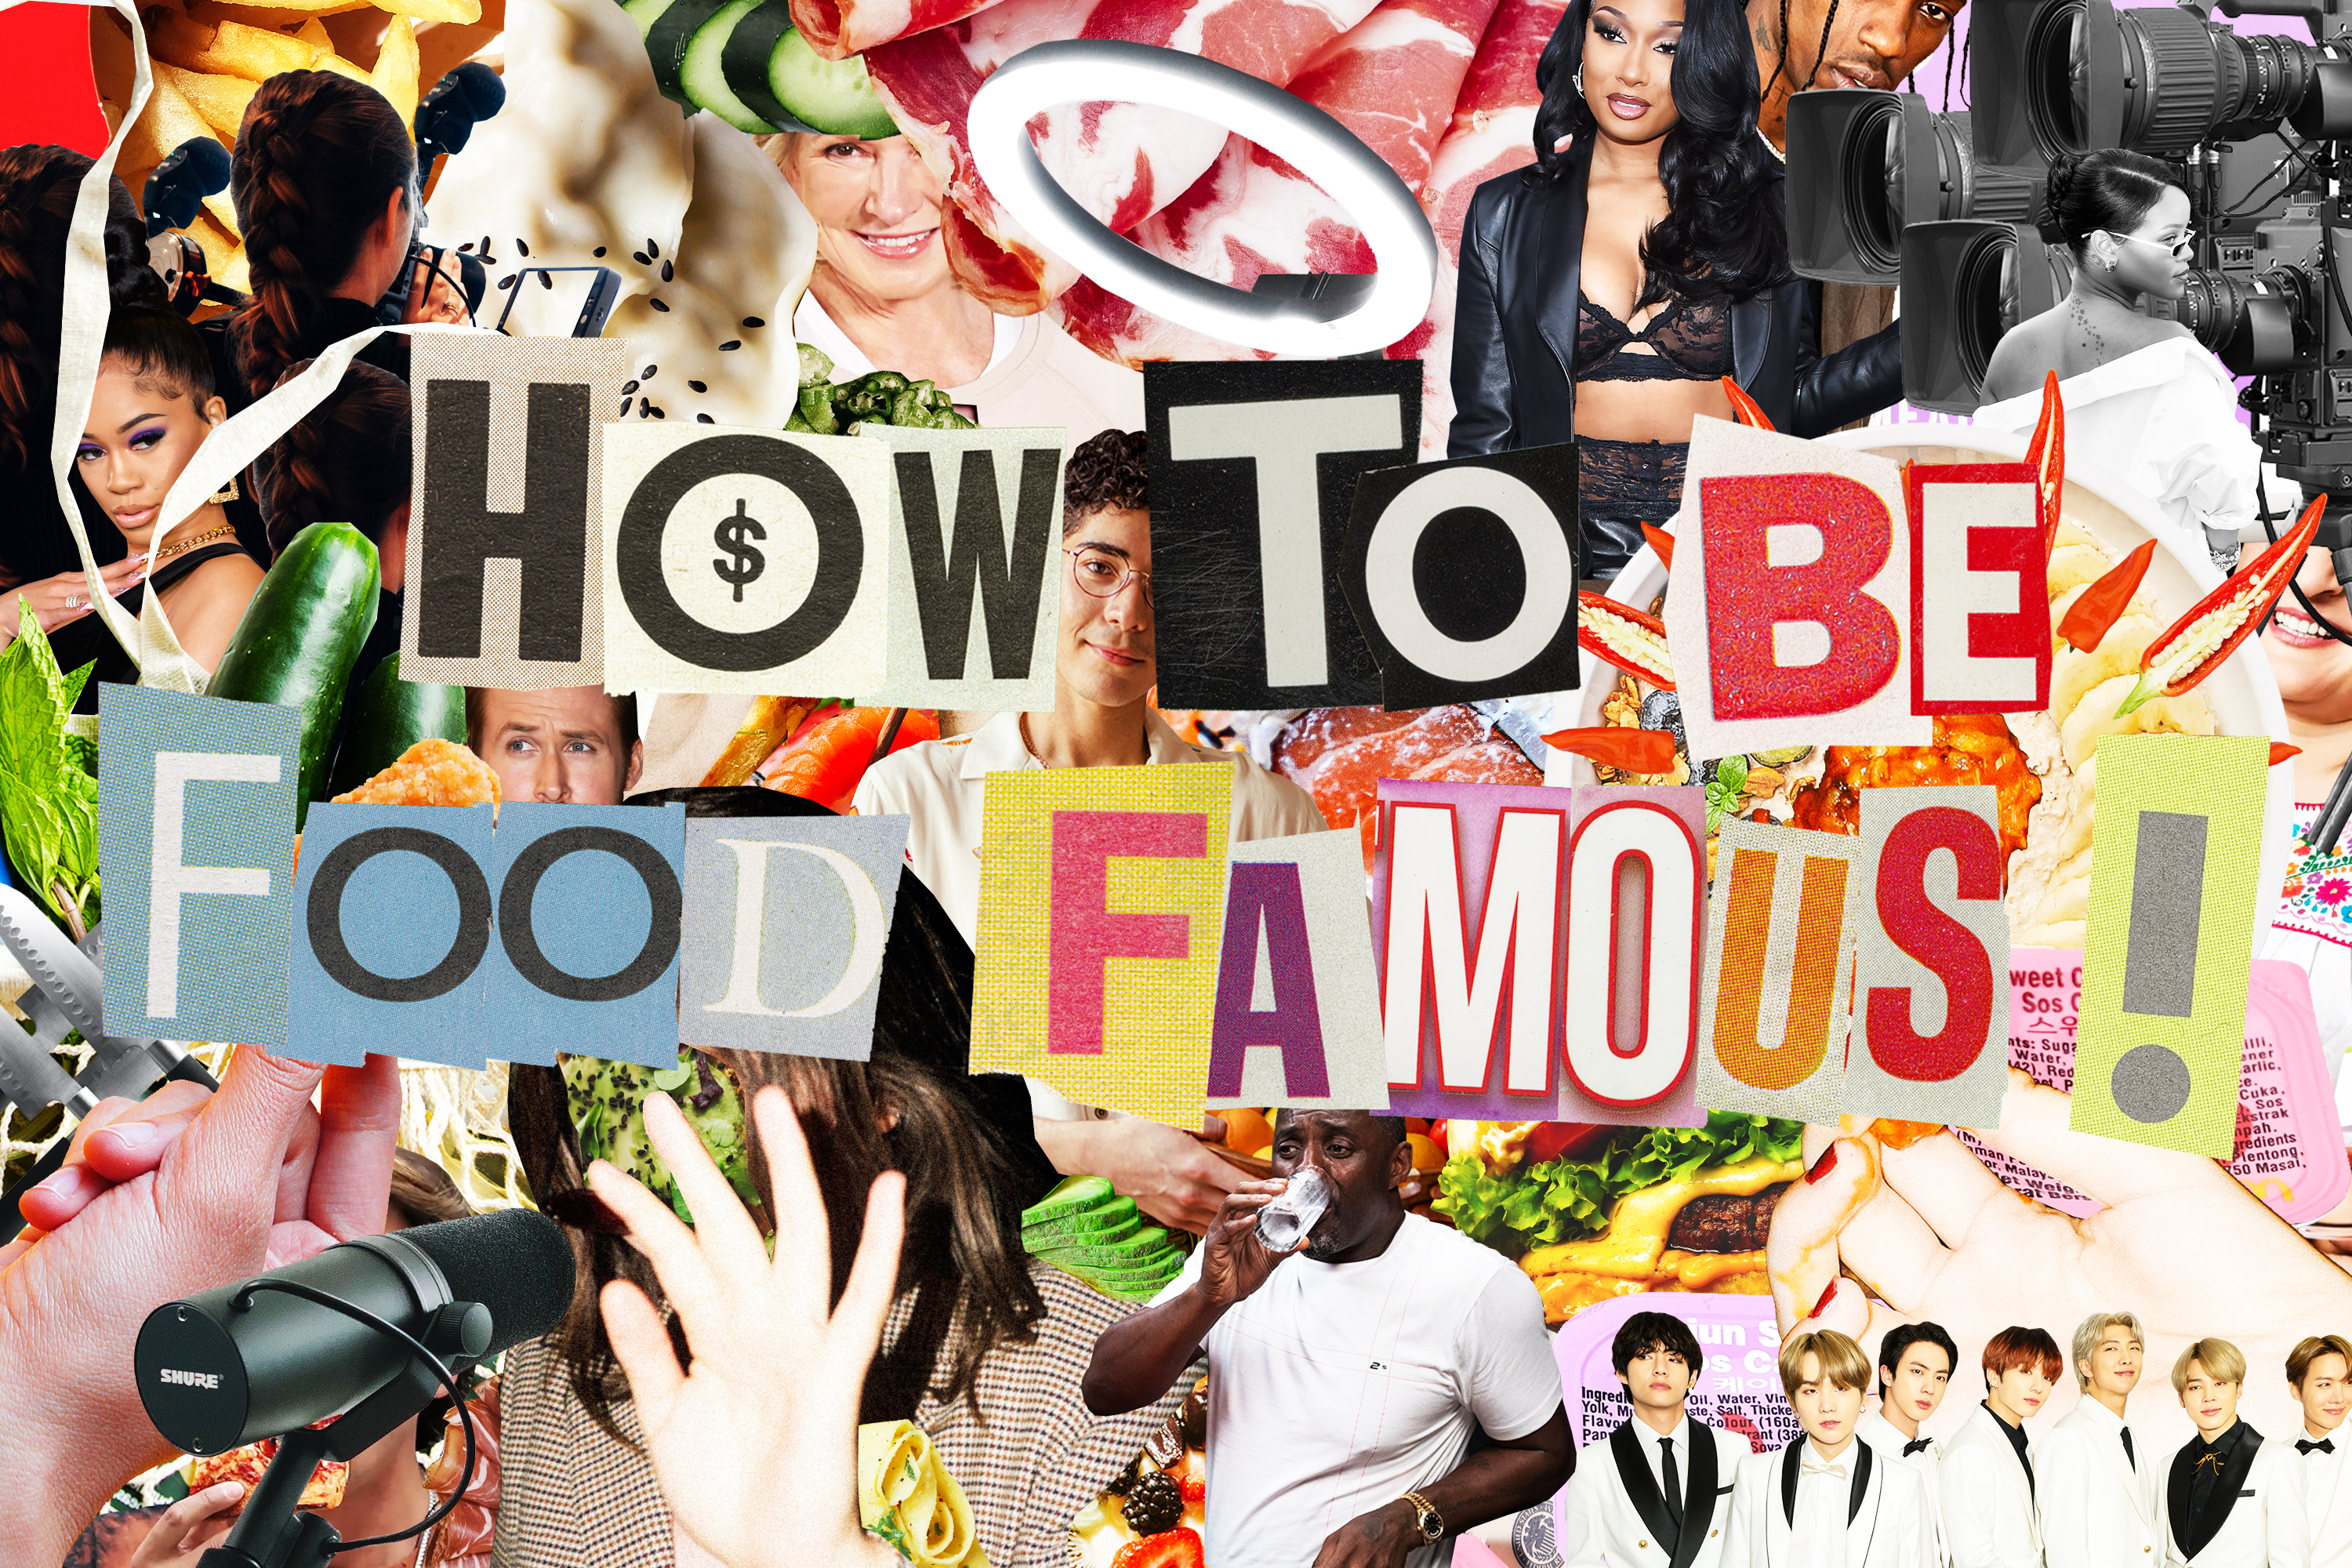 How To Be Food Famous!